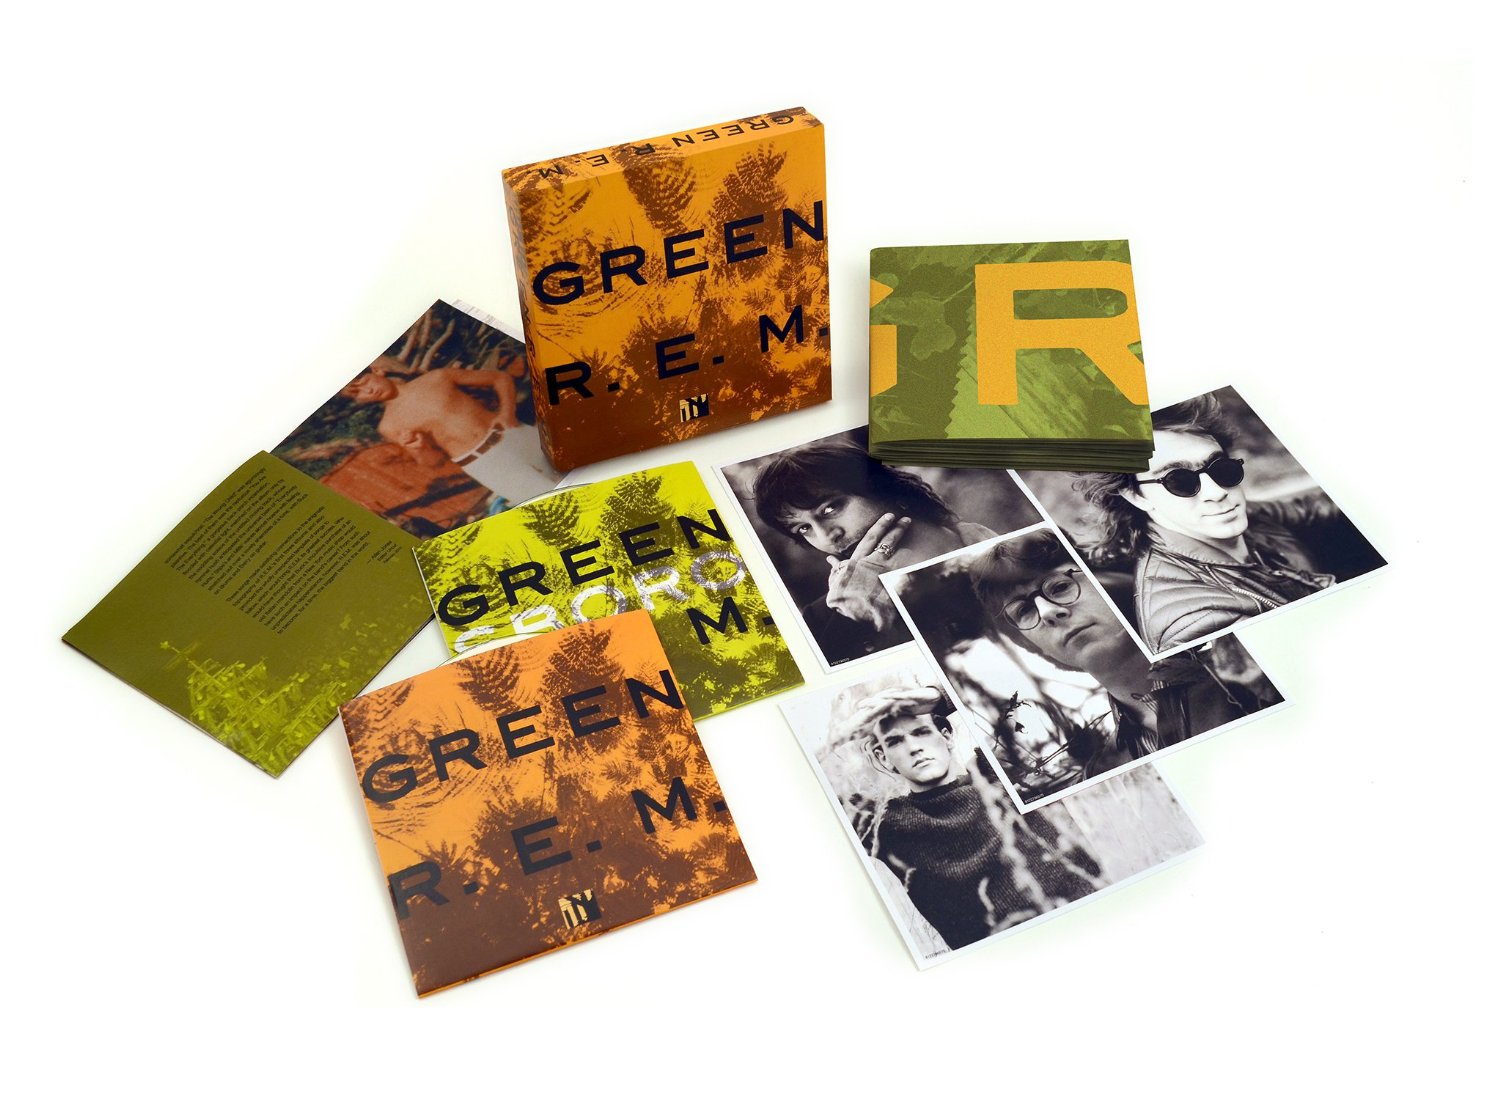 News Added Mar 29, 2013 R.E.M. achieved global success with the 1988 release of Green, the Athens, Georgia quartet s sixth studio album and first for Warner Bros. Records, which would be the band s label home for the rest of their recording career. While R.E.M. was fast becoming one of the most acclaimed and […]